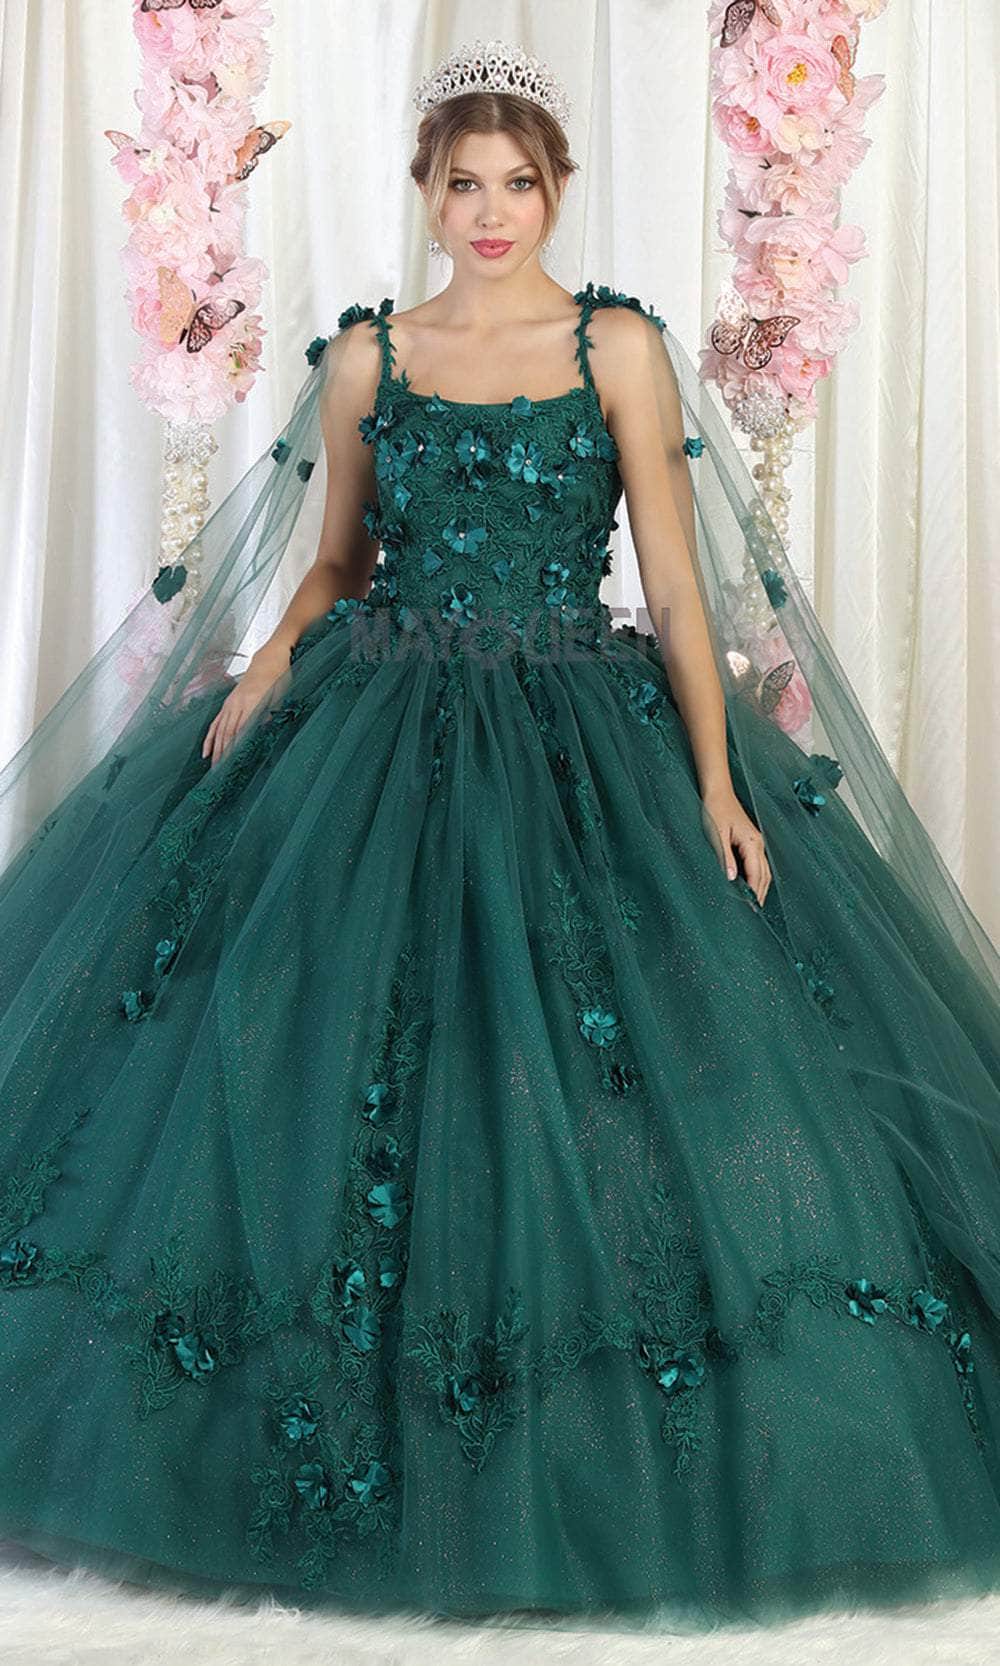 May Queen LK185 - Floral Appliqued Sleeveless Ballgown
